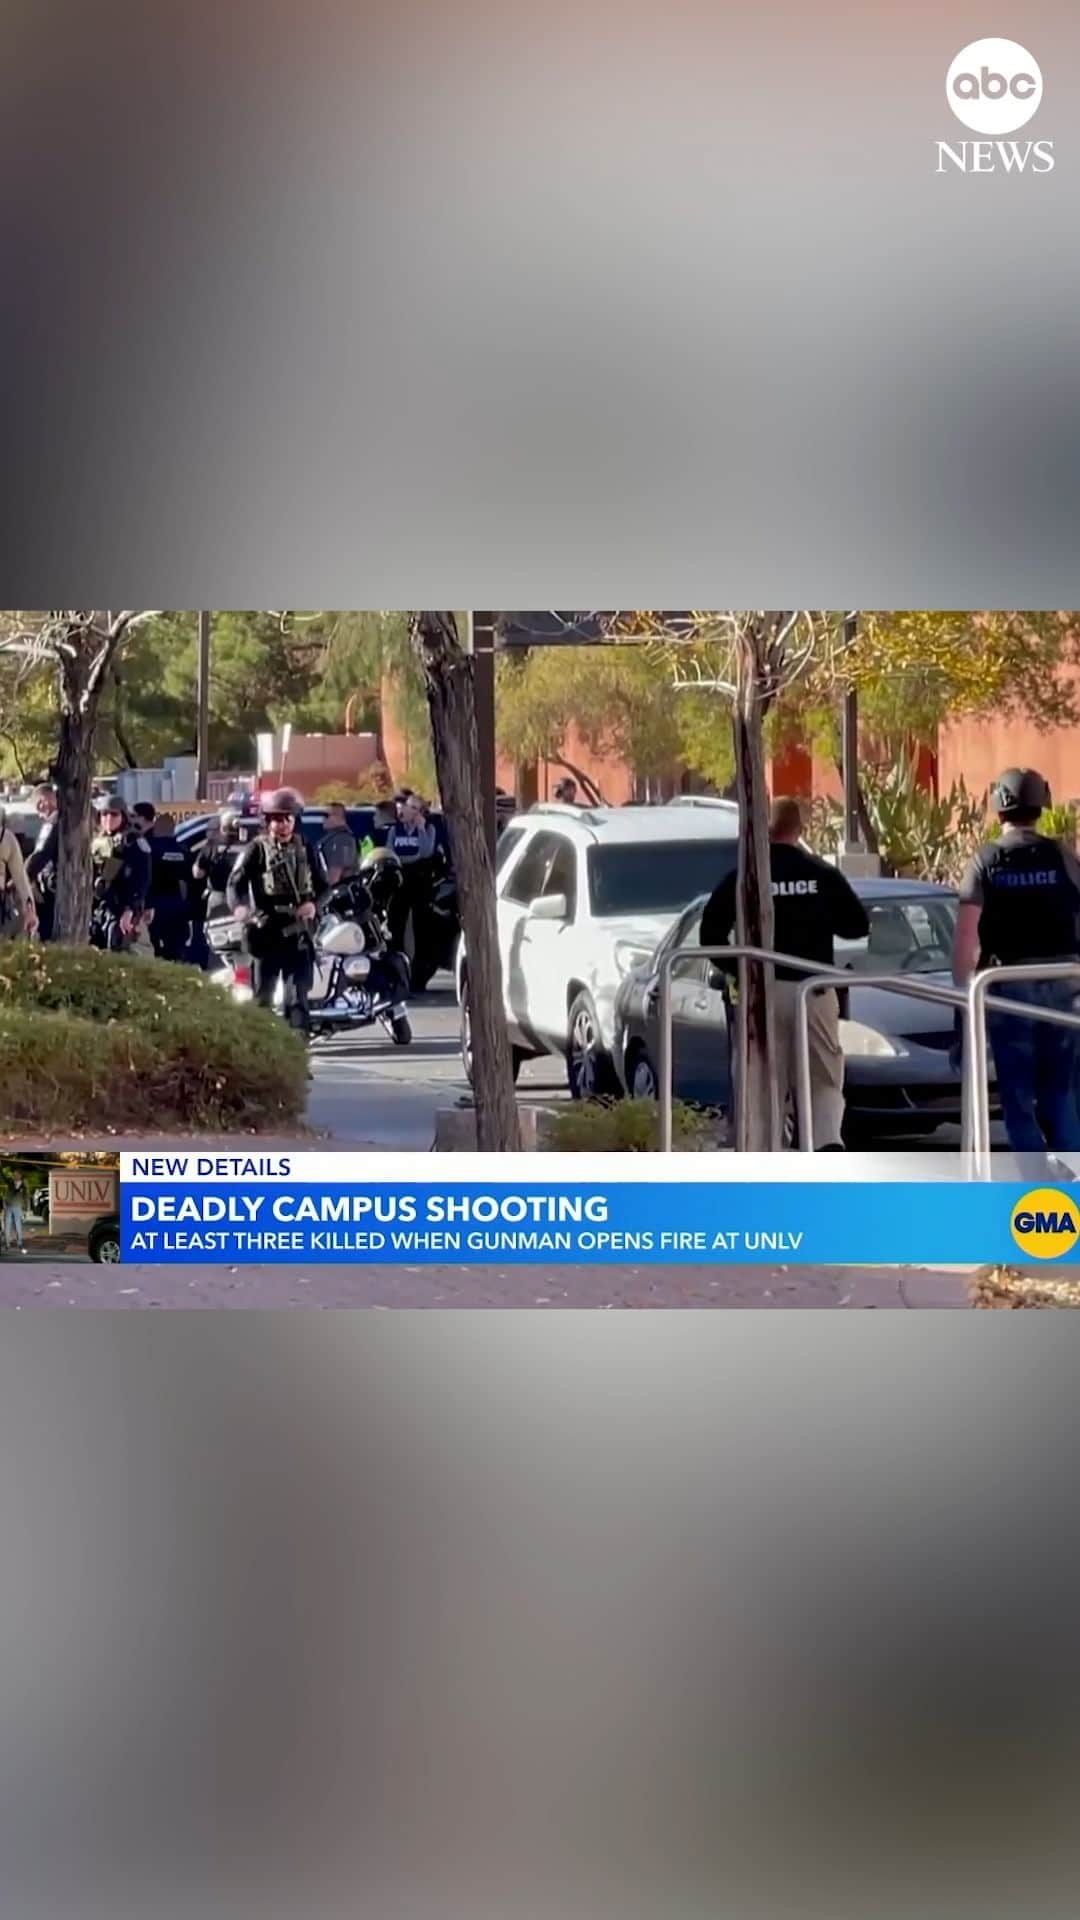 ABC Newsのインスタグラム：「The deceased suspect in the University of Nevada shooting has been identified as Anthony Polito, 67, multiple law enforcement sources told ABC News.  Polito had applied for a college professorship at UNLV, but was not hired, sources said.   He had been armed with a handgun during Wednesday's deadly on-campus attack.  Investigators have now determined that the three victims killed were faculty or staff, not students.」